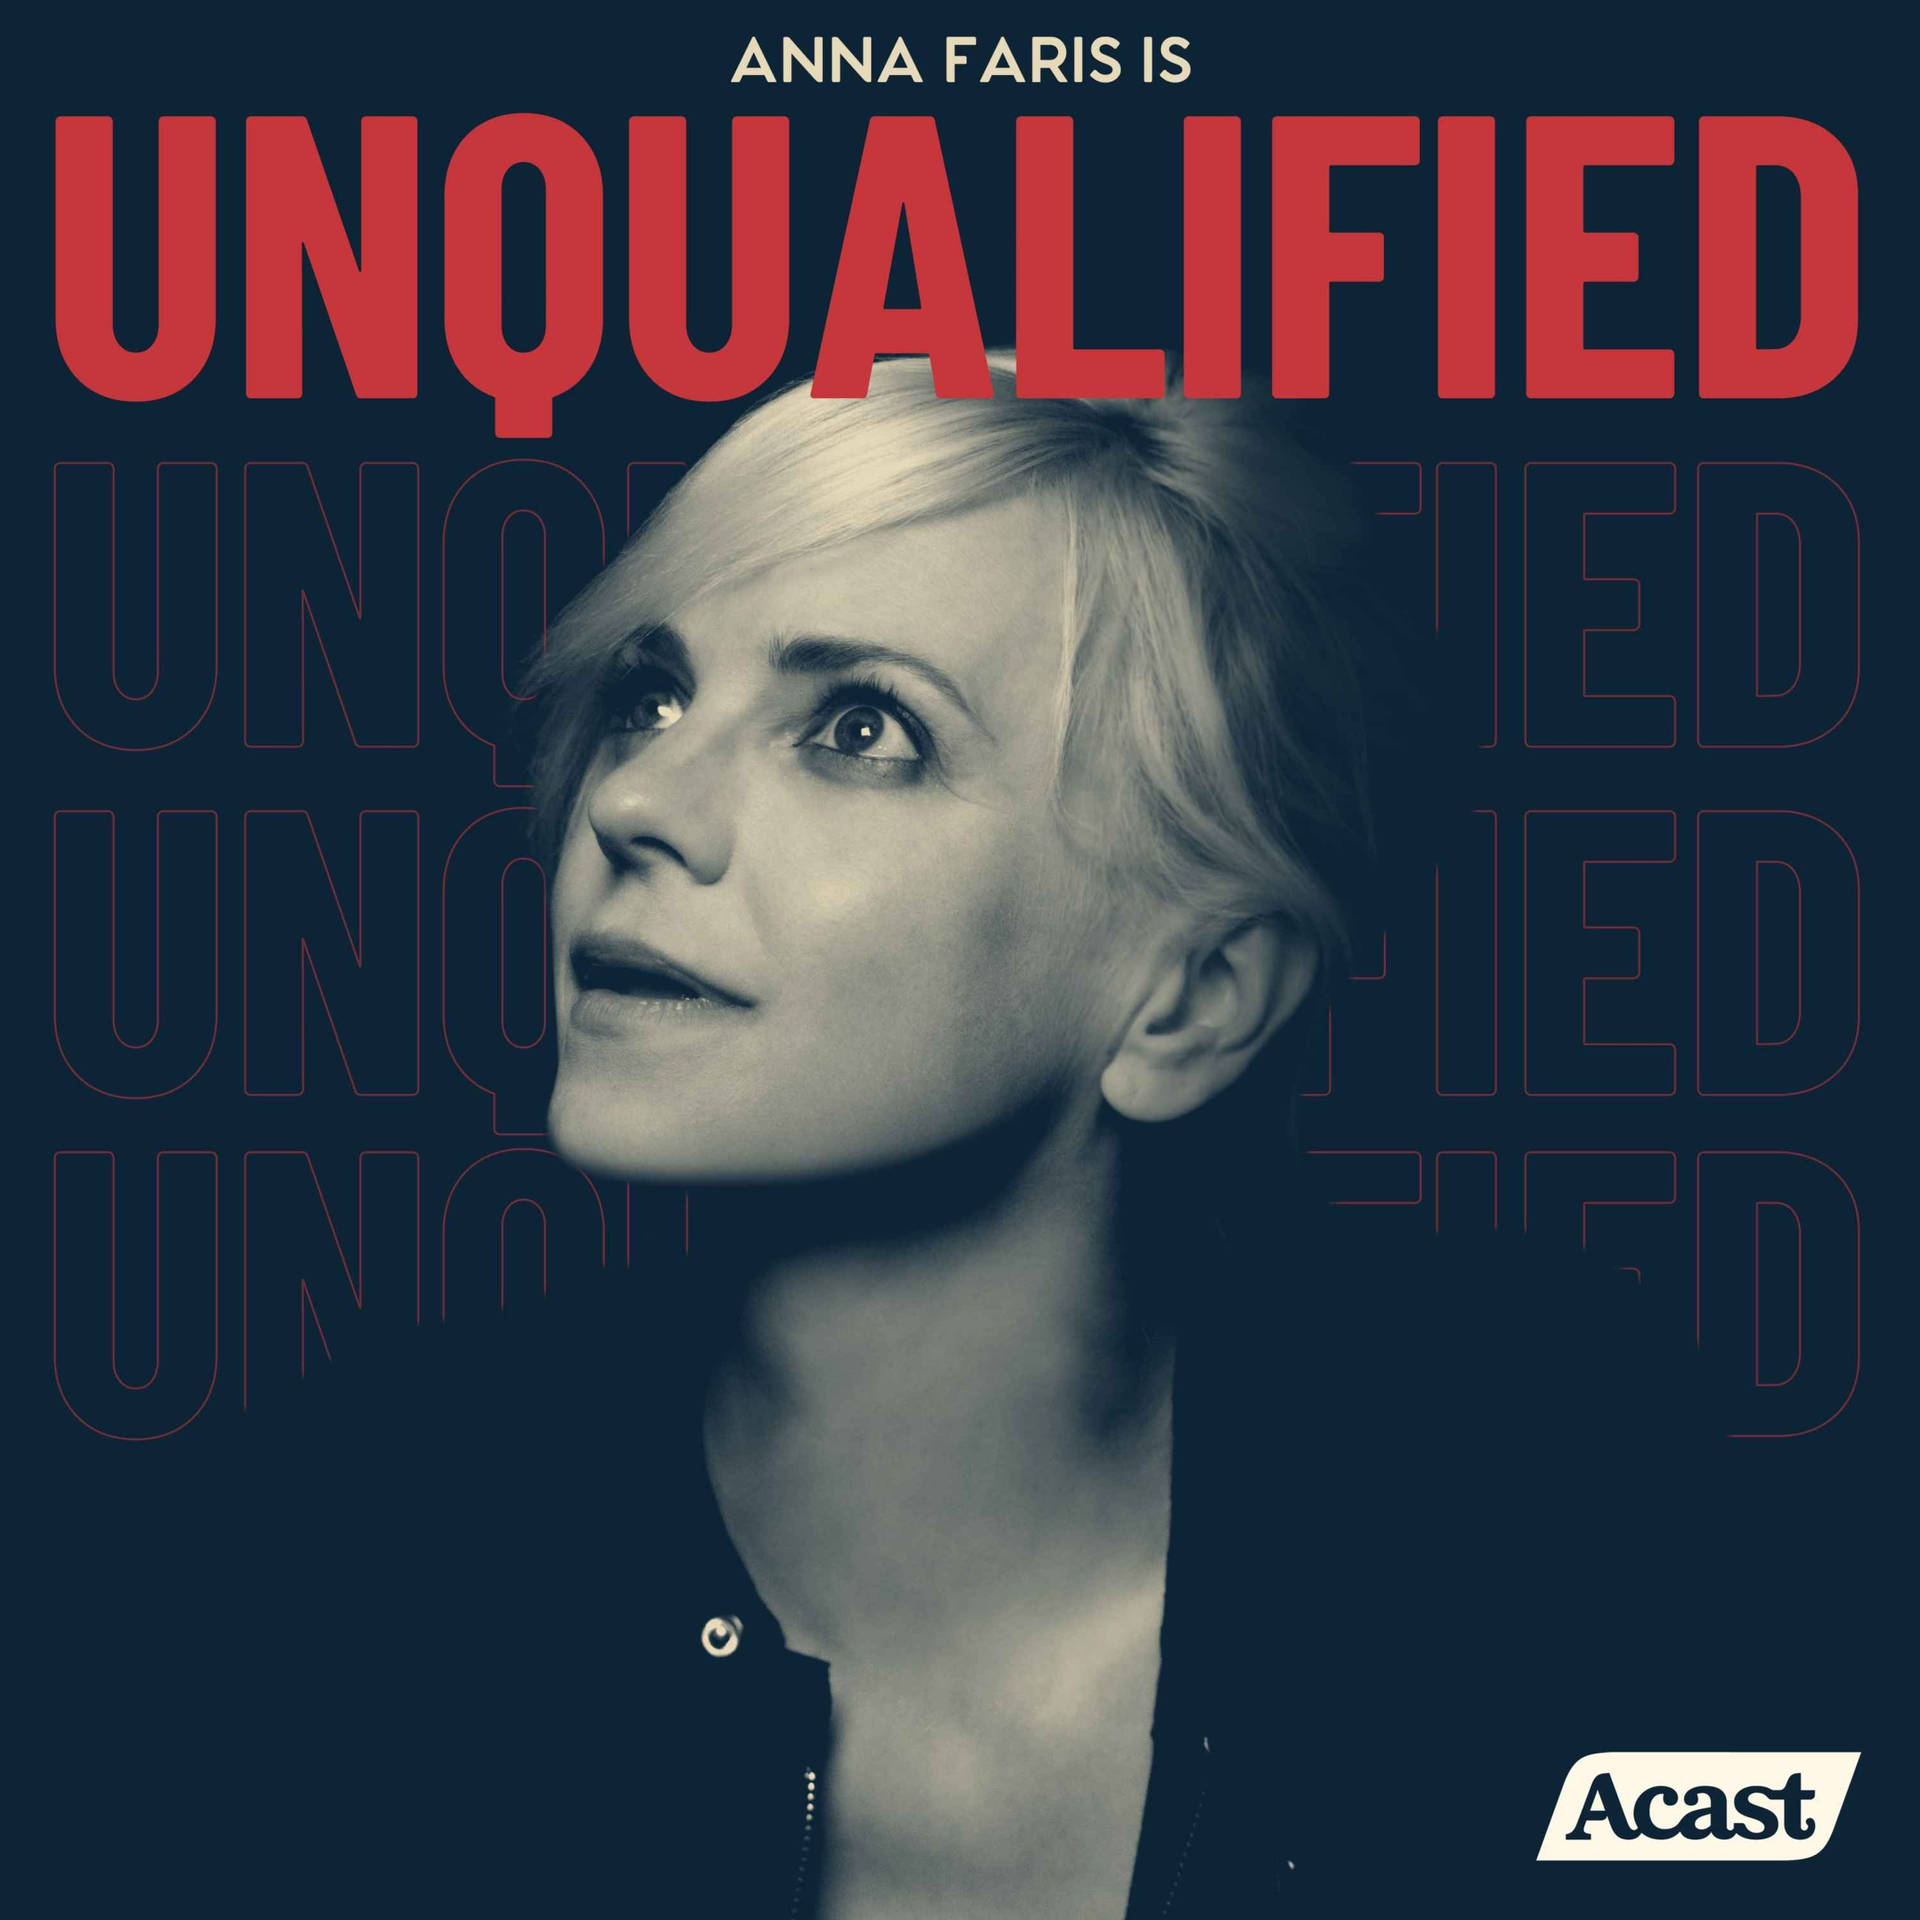 Anna Faris Is Unqualified Podcast Cover Wallpaper